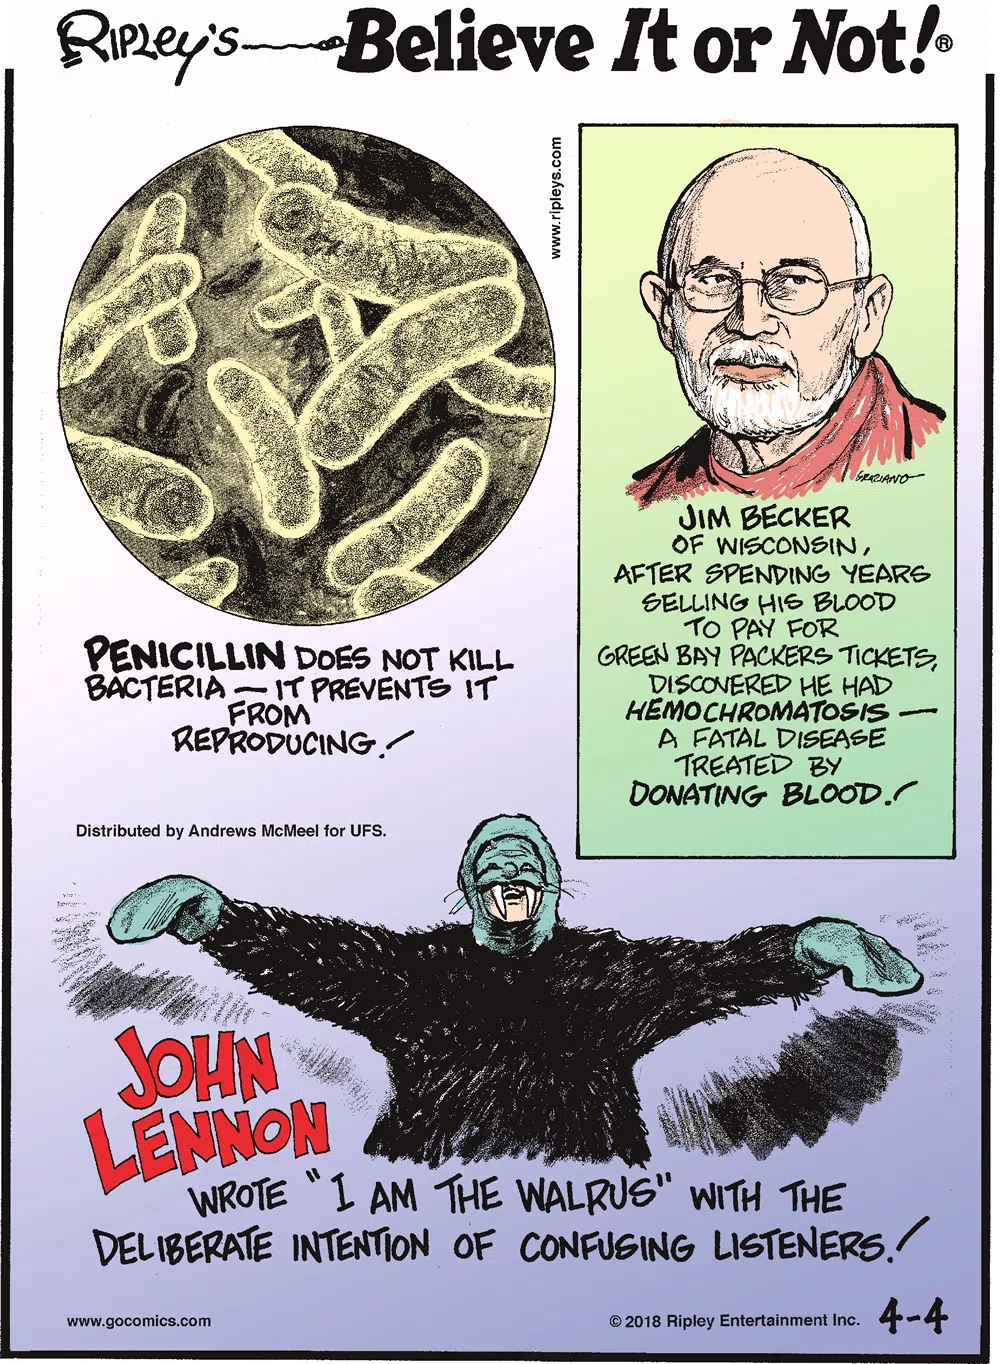 Penicillin does not kill bacteria - it prevents it from reproducing!-------------------- Jim Becker of Wisconsin, after spending years selling his blood to pay for Green Bay Packers tickets, discovered he had hemochromatosis - a fatal disease treated by donating blood!-------------------- John Lennon wrote "I Am the Walrus" with the deliberate intention of confusing listeners!